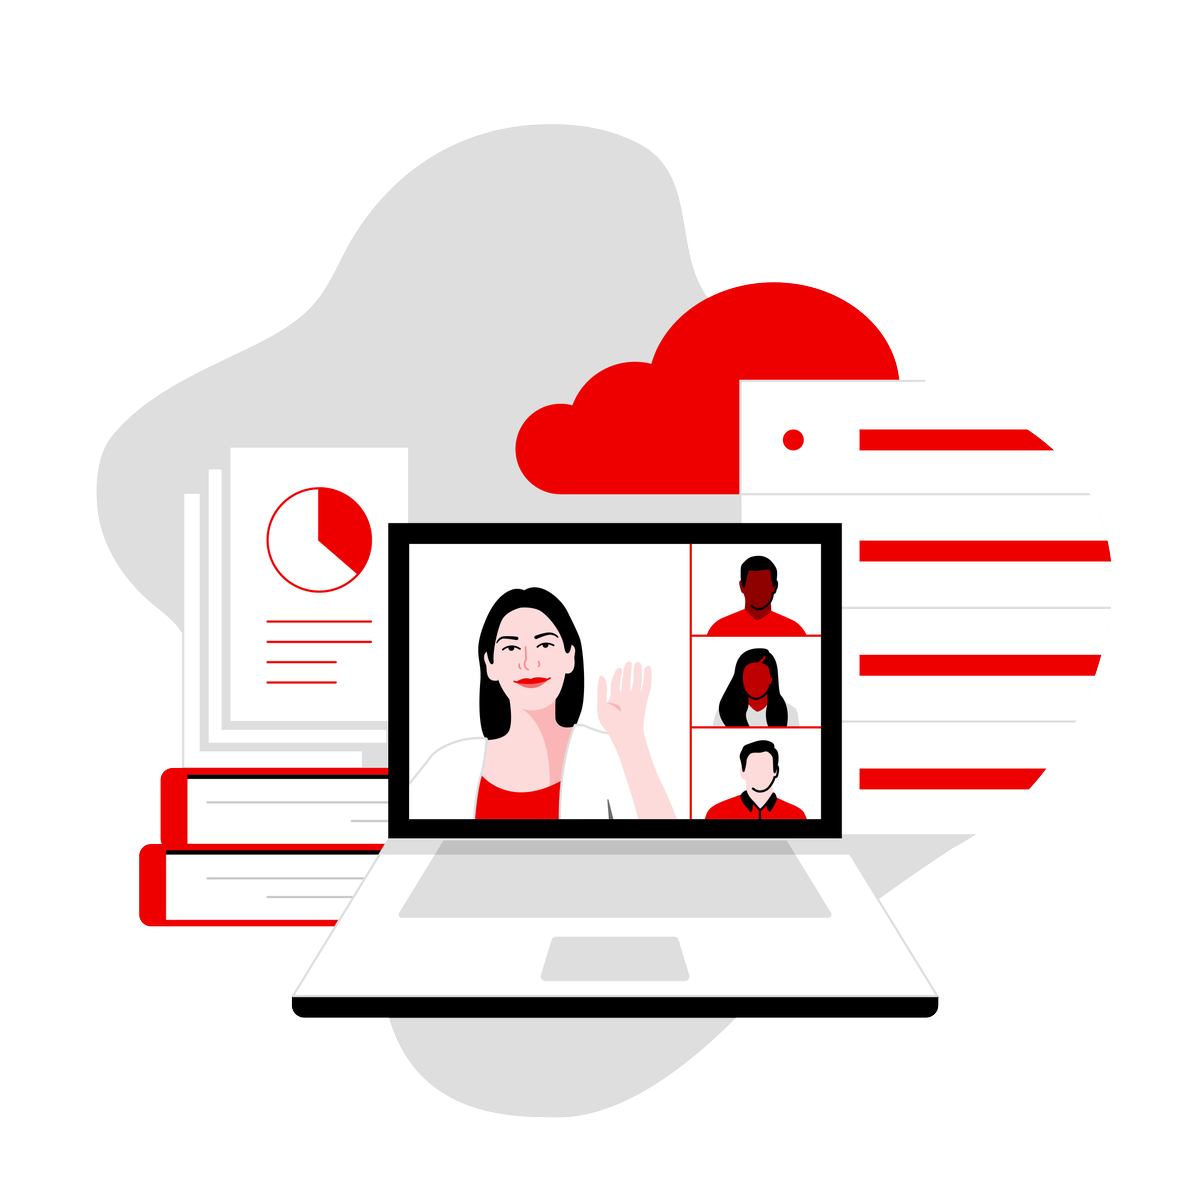 Are you an IT professional, looking to build foundational virtualization skills or make a career change? Red Hat offers a Red Hat OpenShift skills path to develop expertise that is in high demand for the future. Read more on the blog: red.ht/3UHVWHA